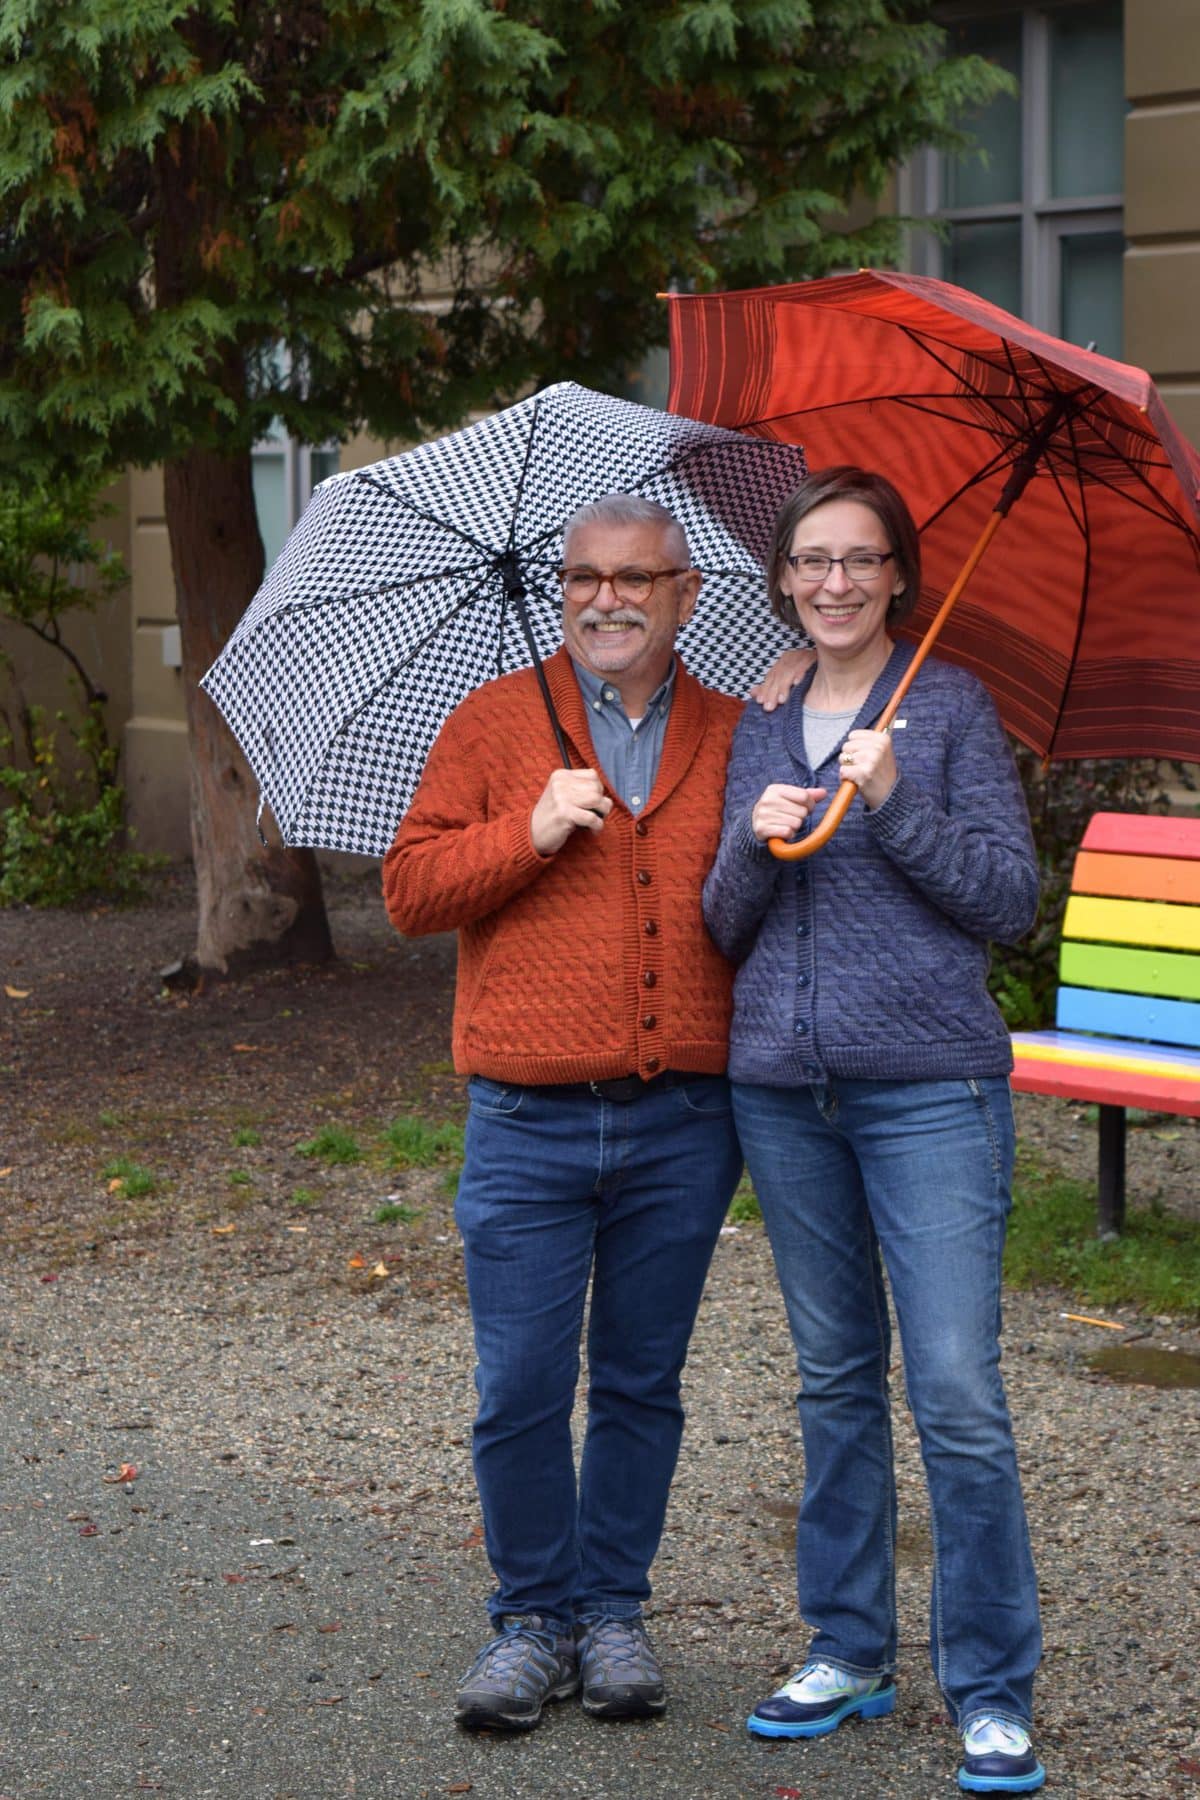 Image description: Man in orange cardigan and woman in blue cardigan, each holding an umbrella, stand in front of a rainbow bench.